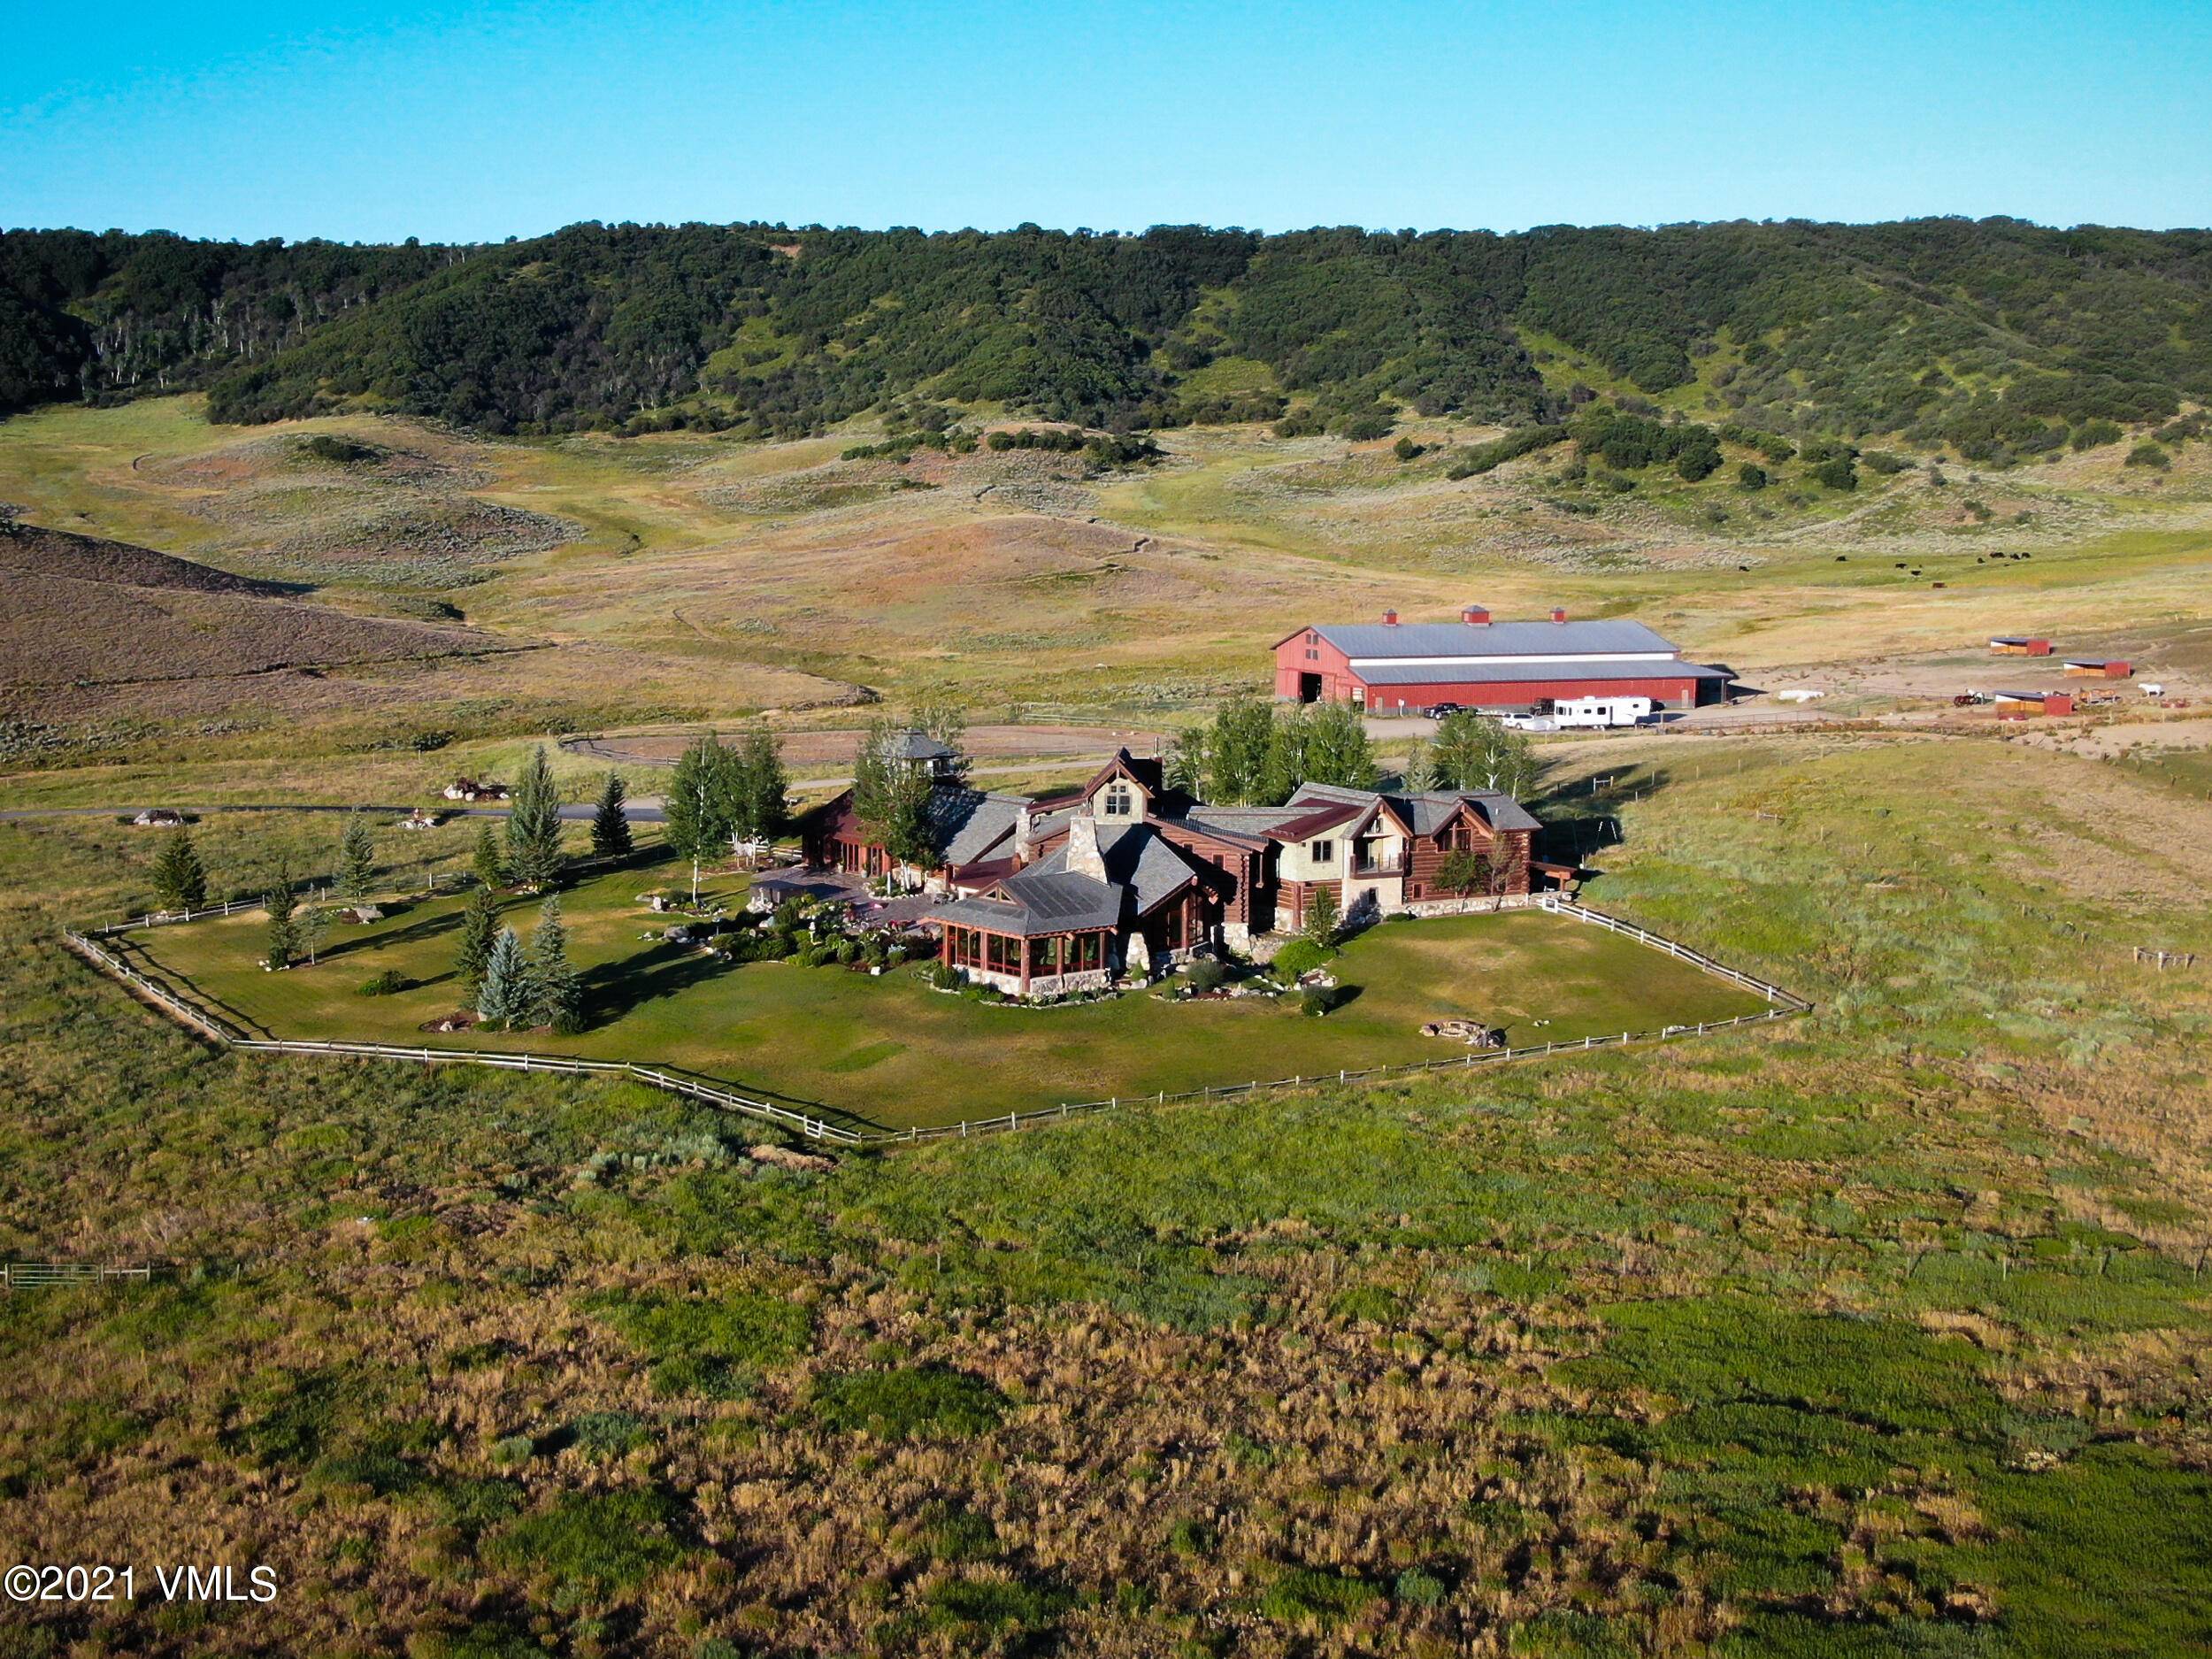 The backdrop to this amazing ranch is Sleeping Giant Mountain, a historic landmark just west of the Elk River Valley.